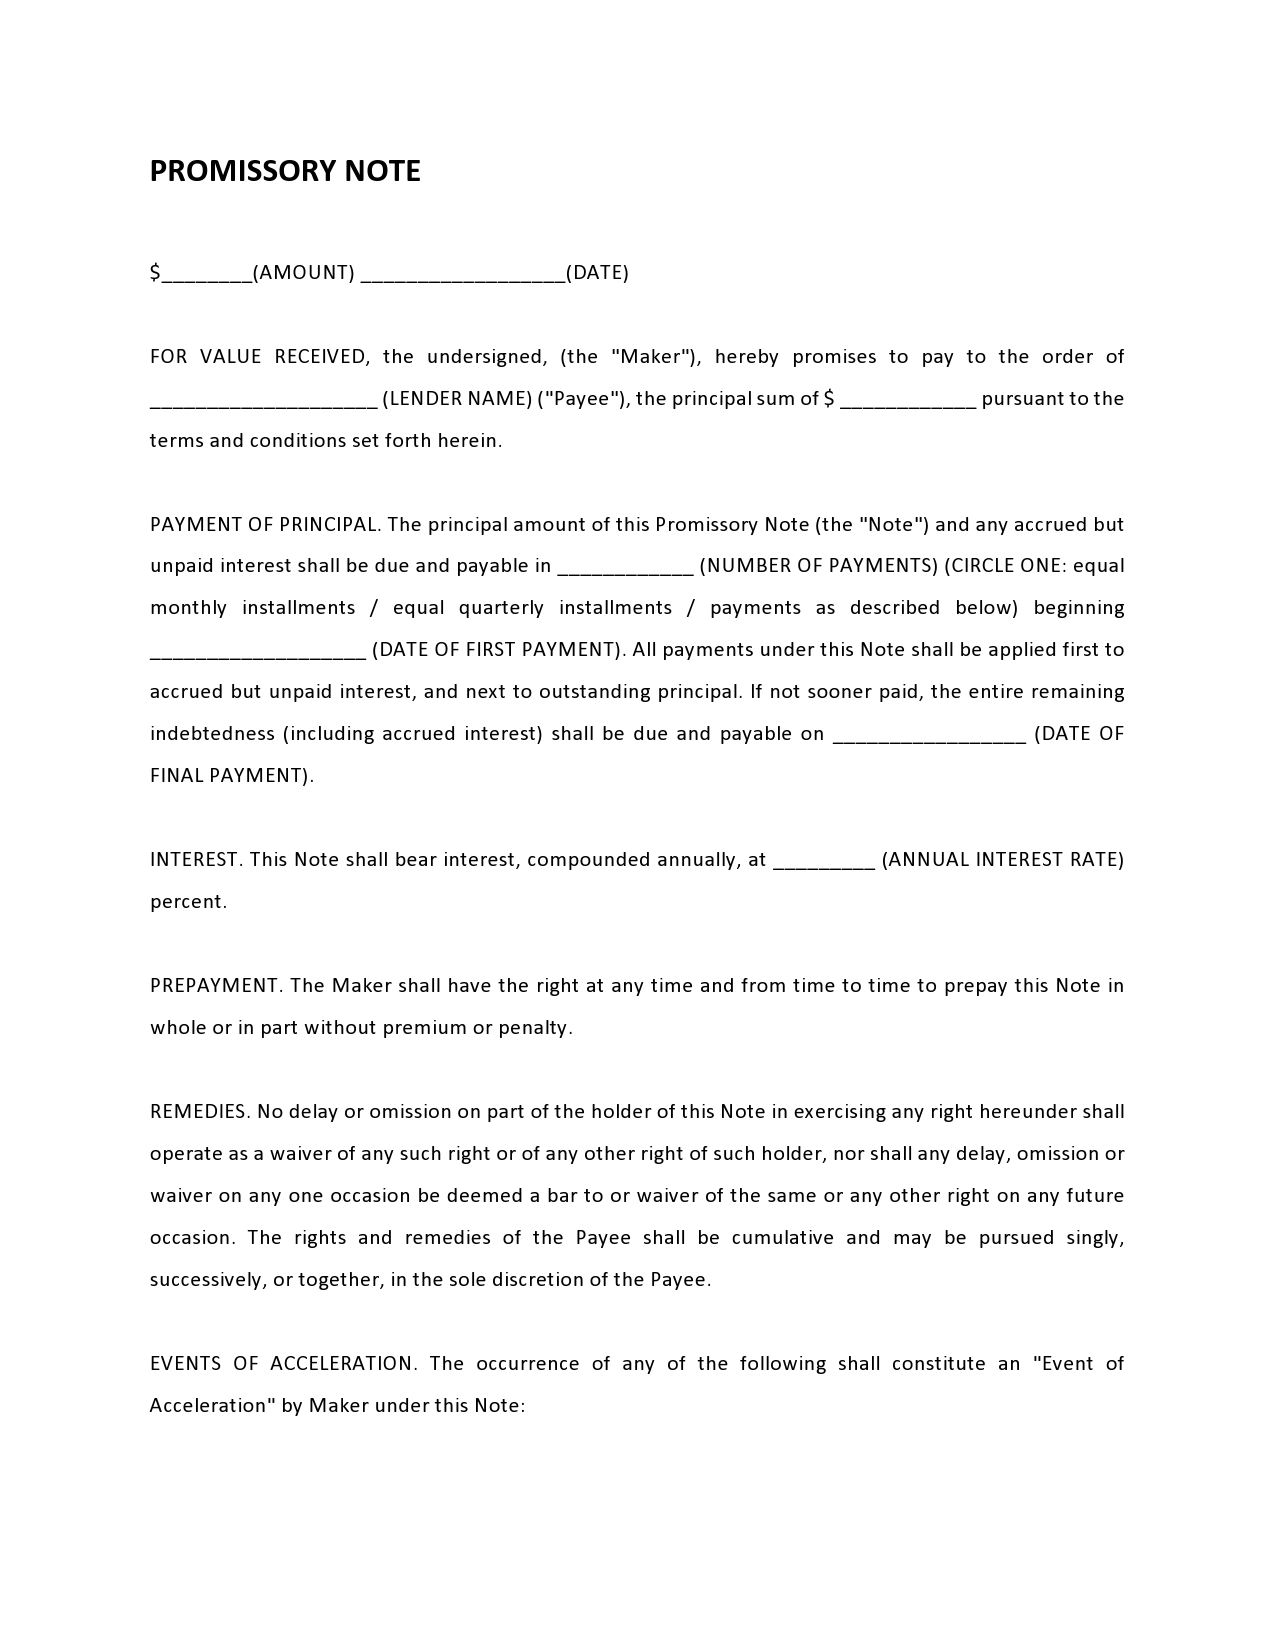 Free promissory note template 24